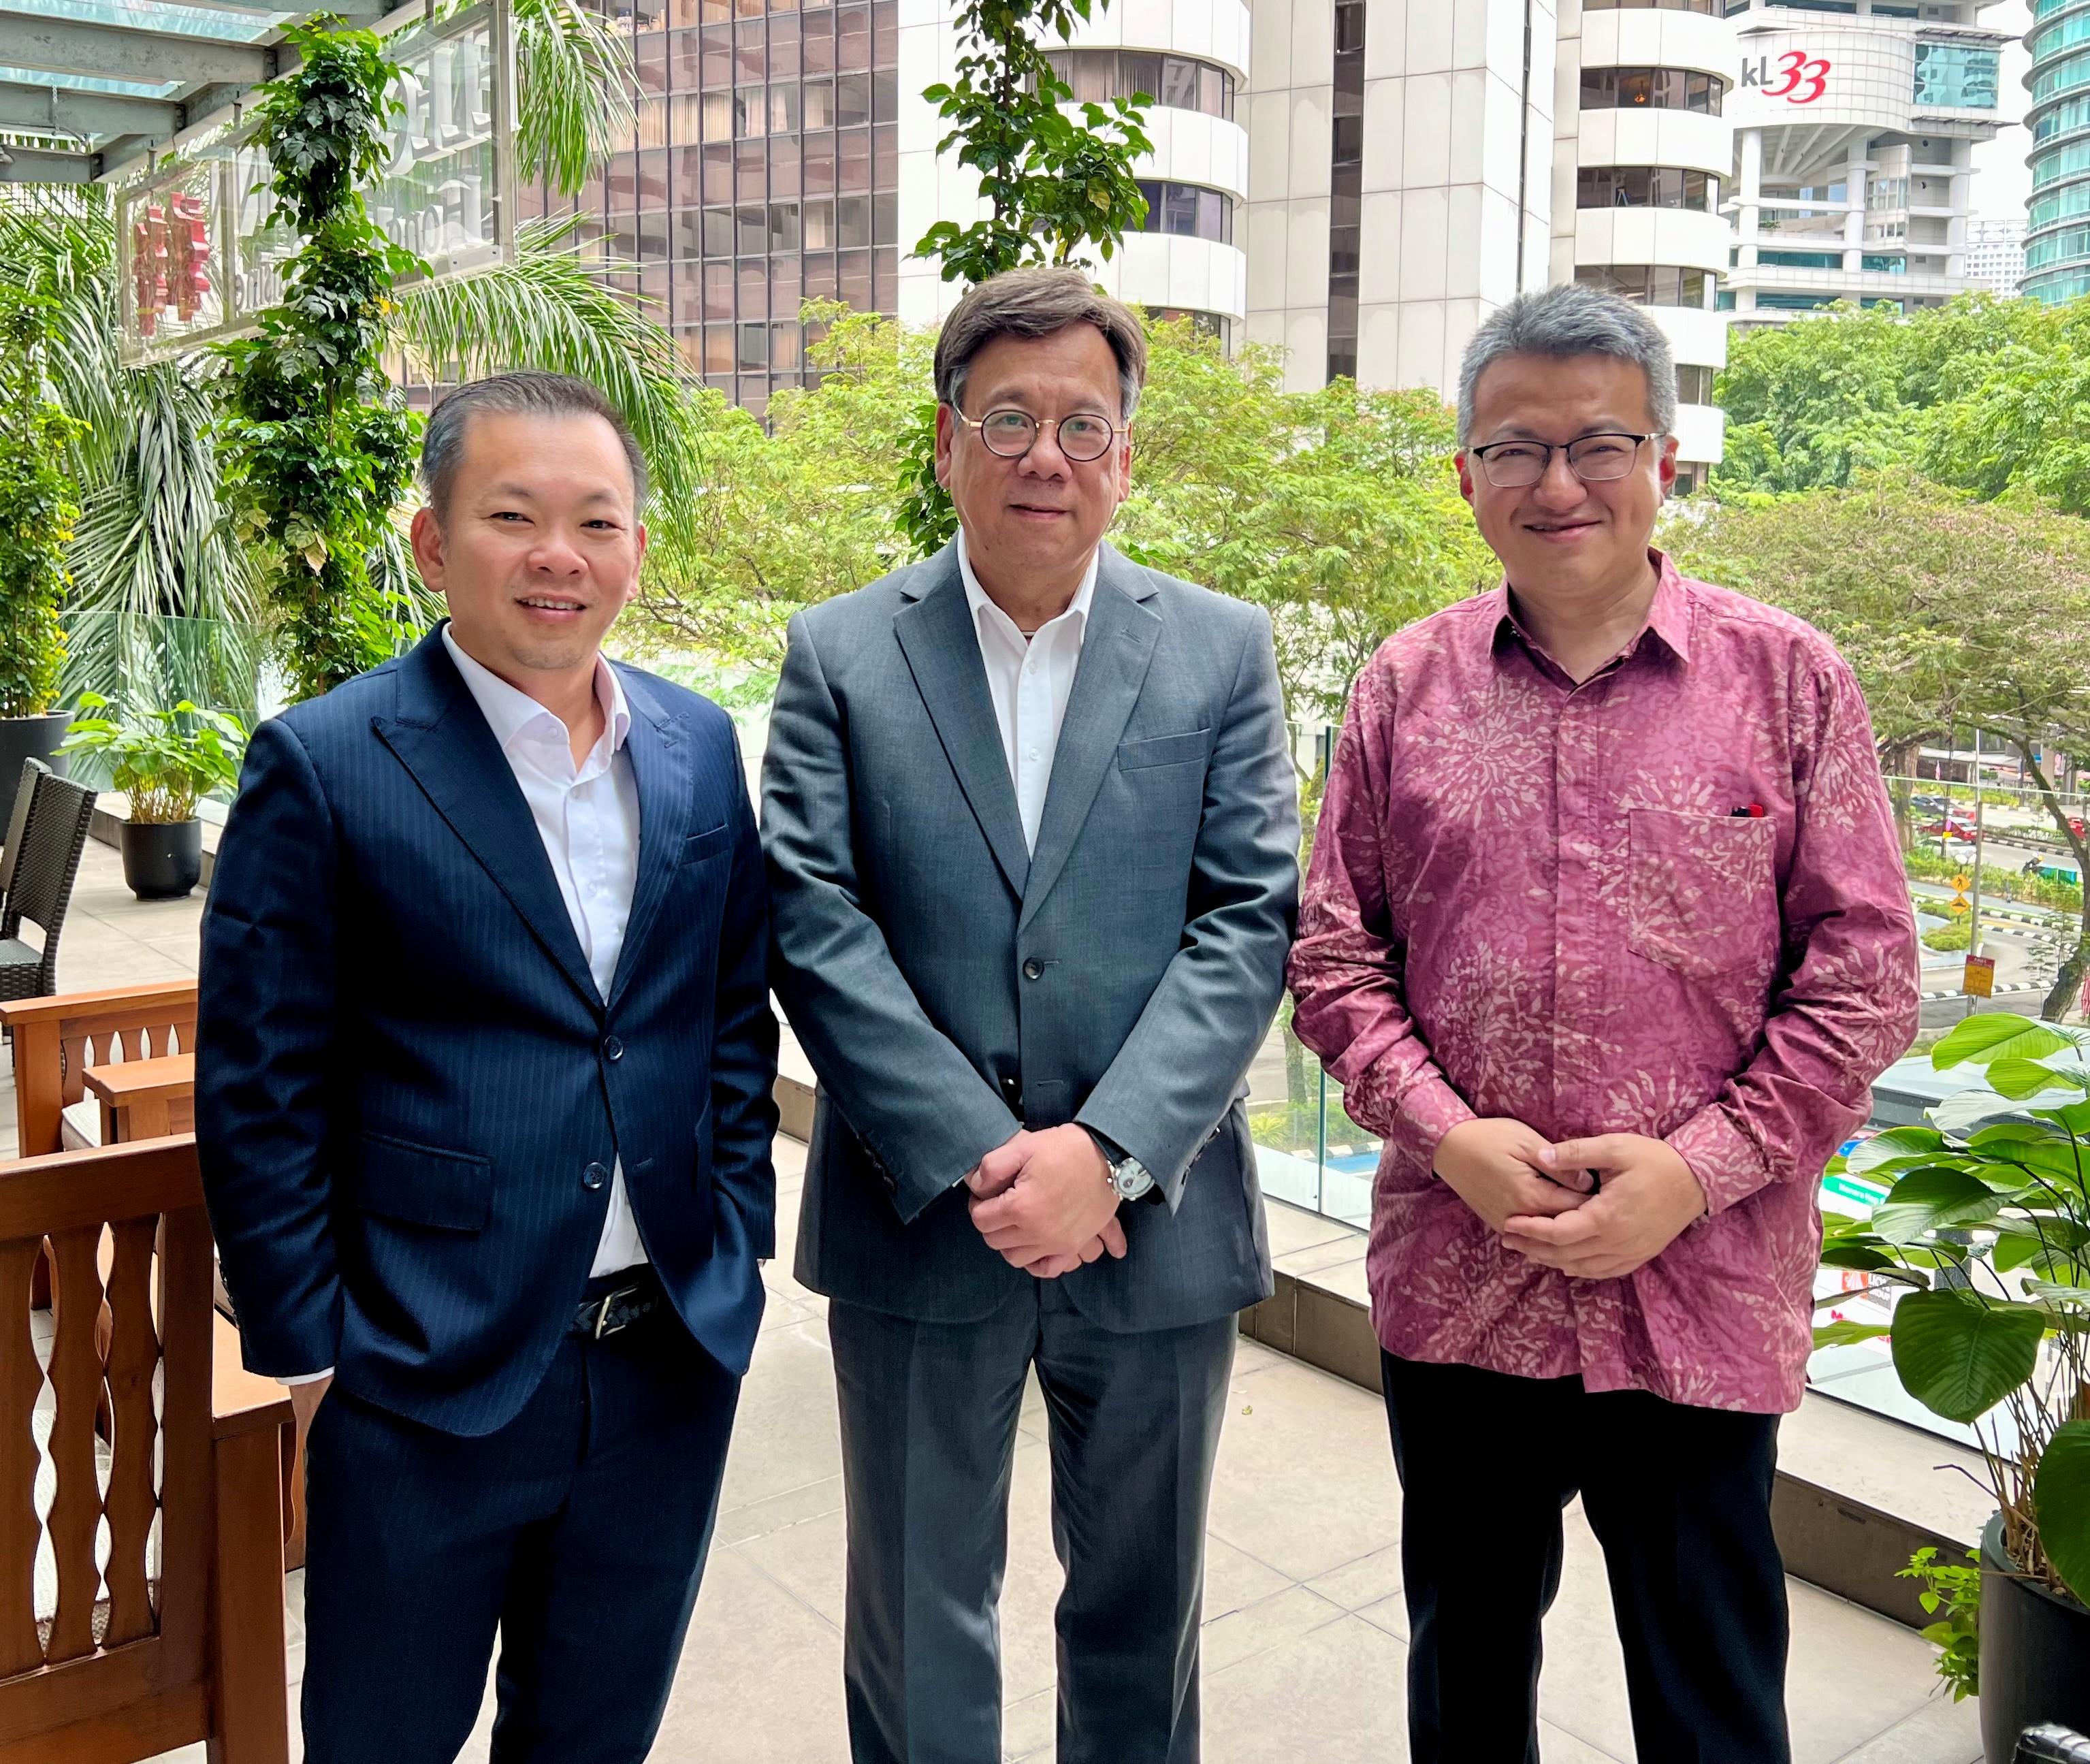 The Secretary for Commerce and Economic Development, Mr Algernon Yau, had a lunch meeting with the Deputy Minister of Investment, Trade and Industry of Malaysia, Mr Liew Chin Tong, and the Deputy Minister of Agriculture and Food Security of Malaysia, Mr Chan Foong Hin, in Kuala Lumpur, Malaysia, today (September 21) to update them on Hong Kong's latest developments and discuss issues of mutual interest. Mr Yau (centre) is pictured with Mr Liew (right) and Mr Chan (left) after the meeting.